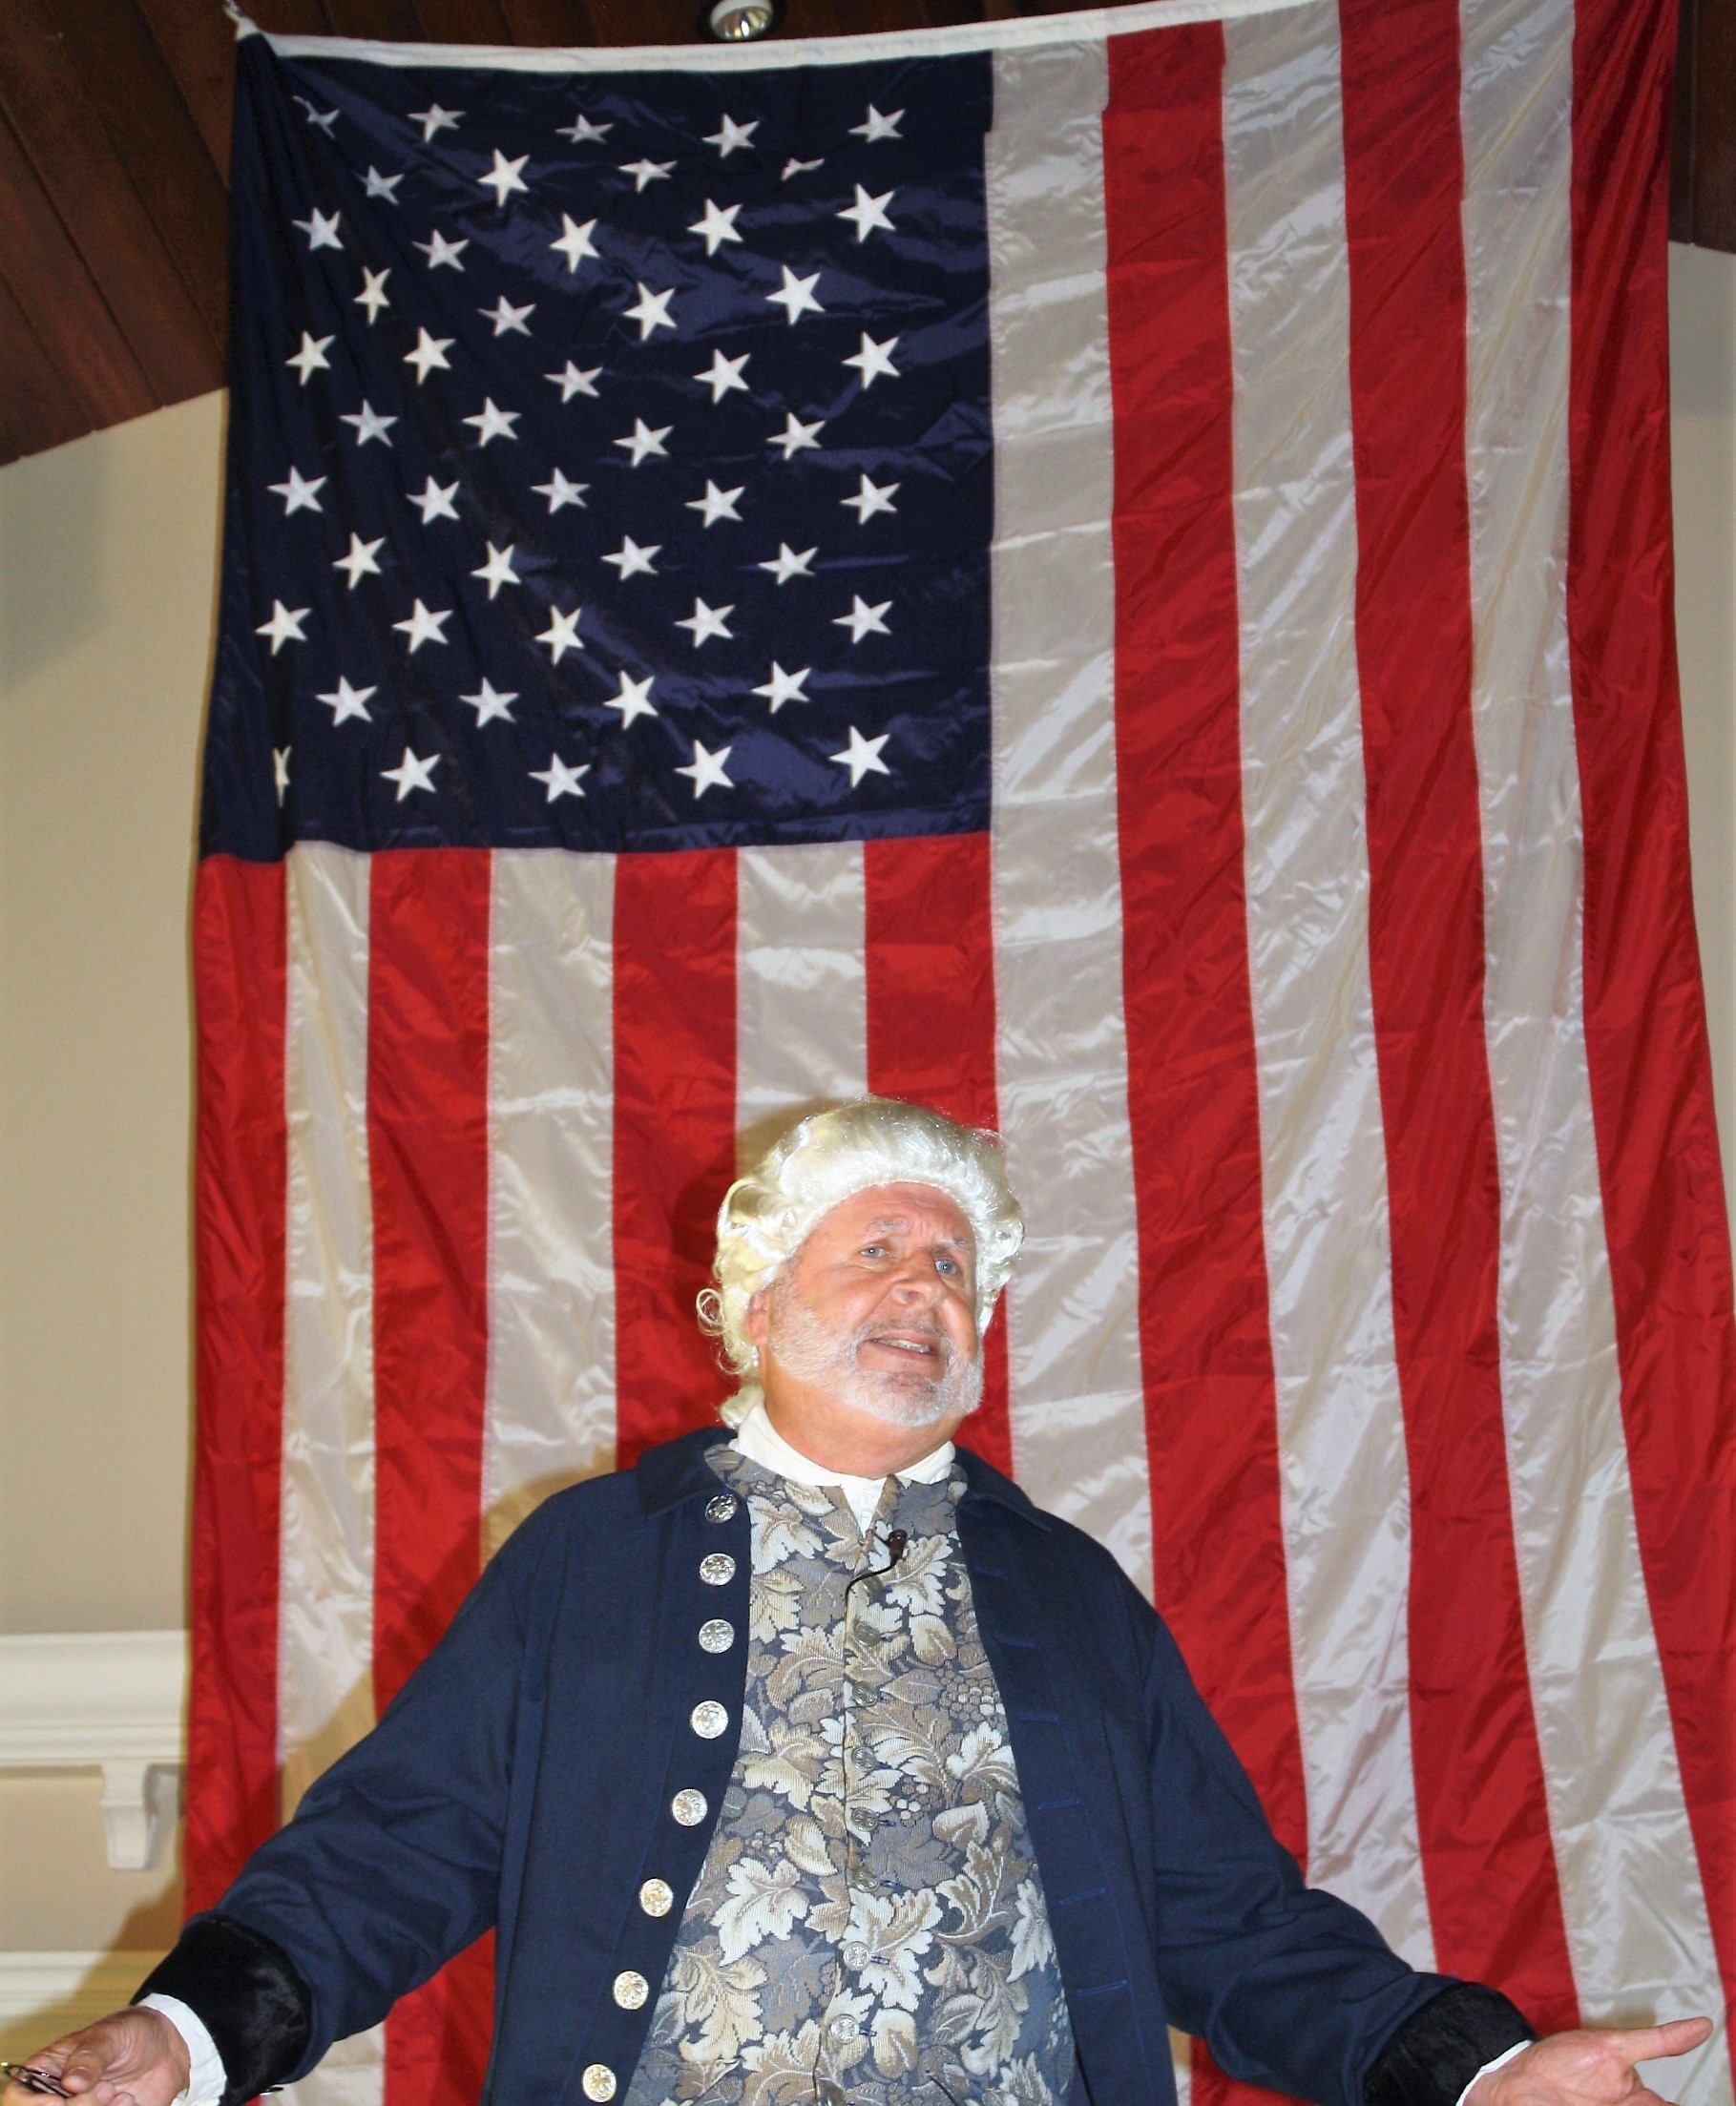 Patrick Henry (Jerry Cameron) delivers his legendary “Give me liberty or give me death!” speech.